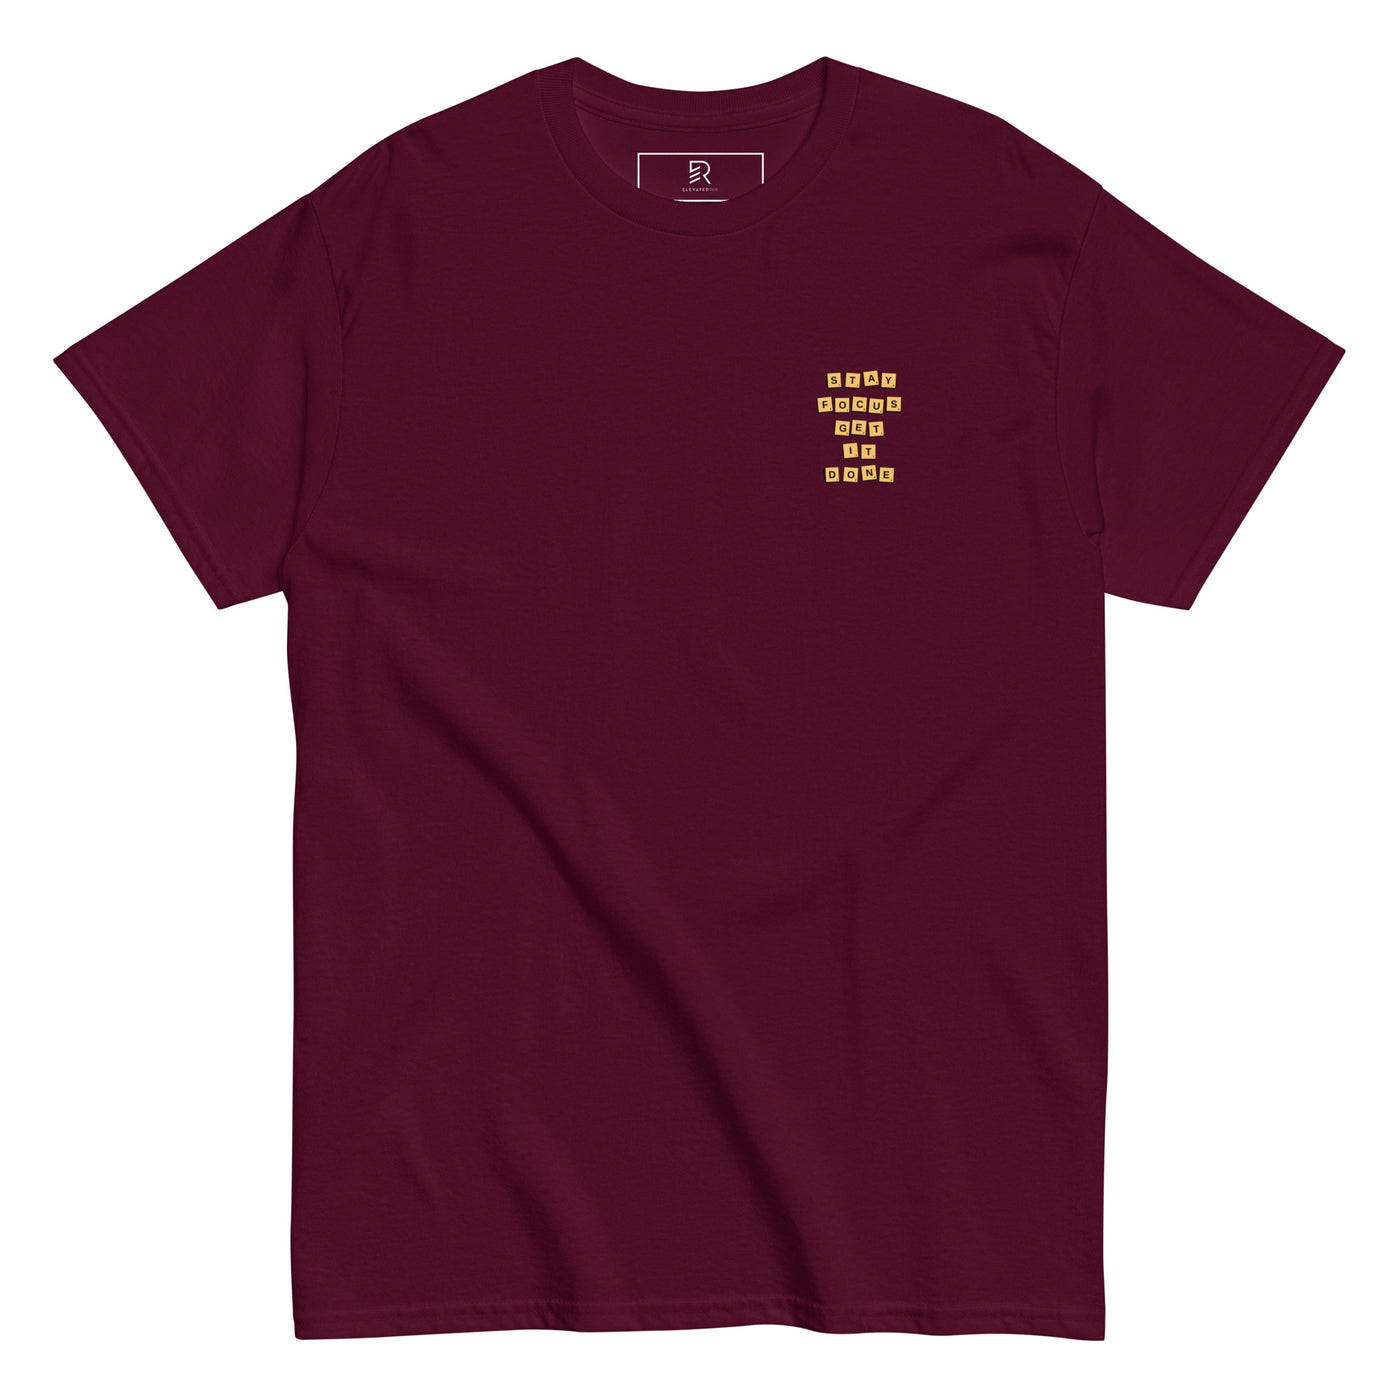 Men’s Classic Maroon Tee - Stay Focus Get It Done